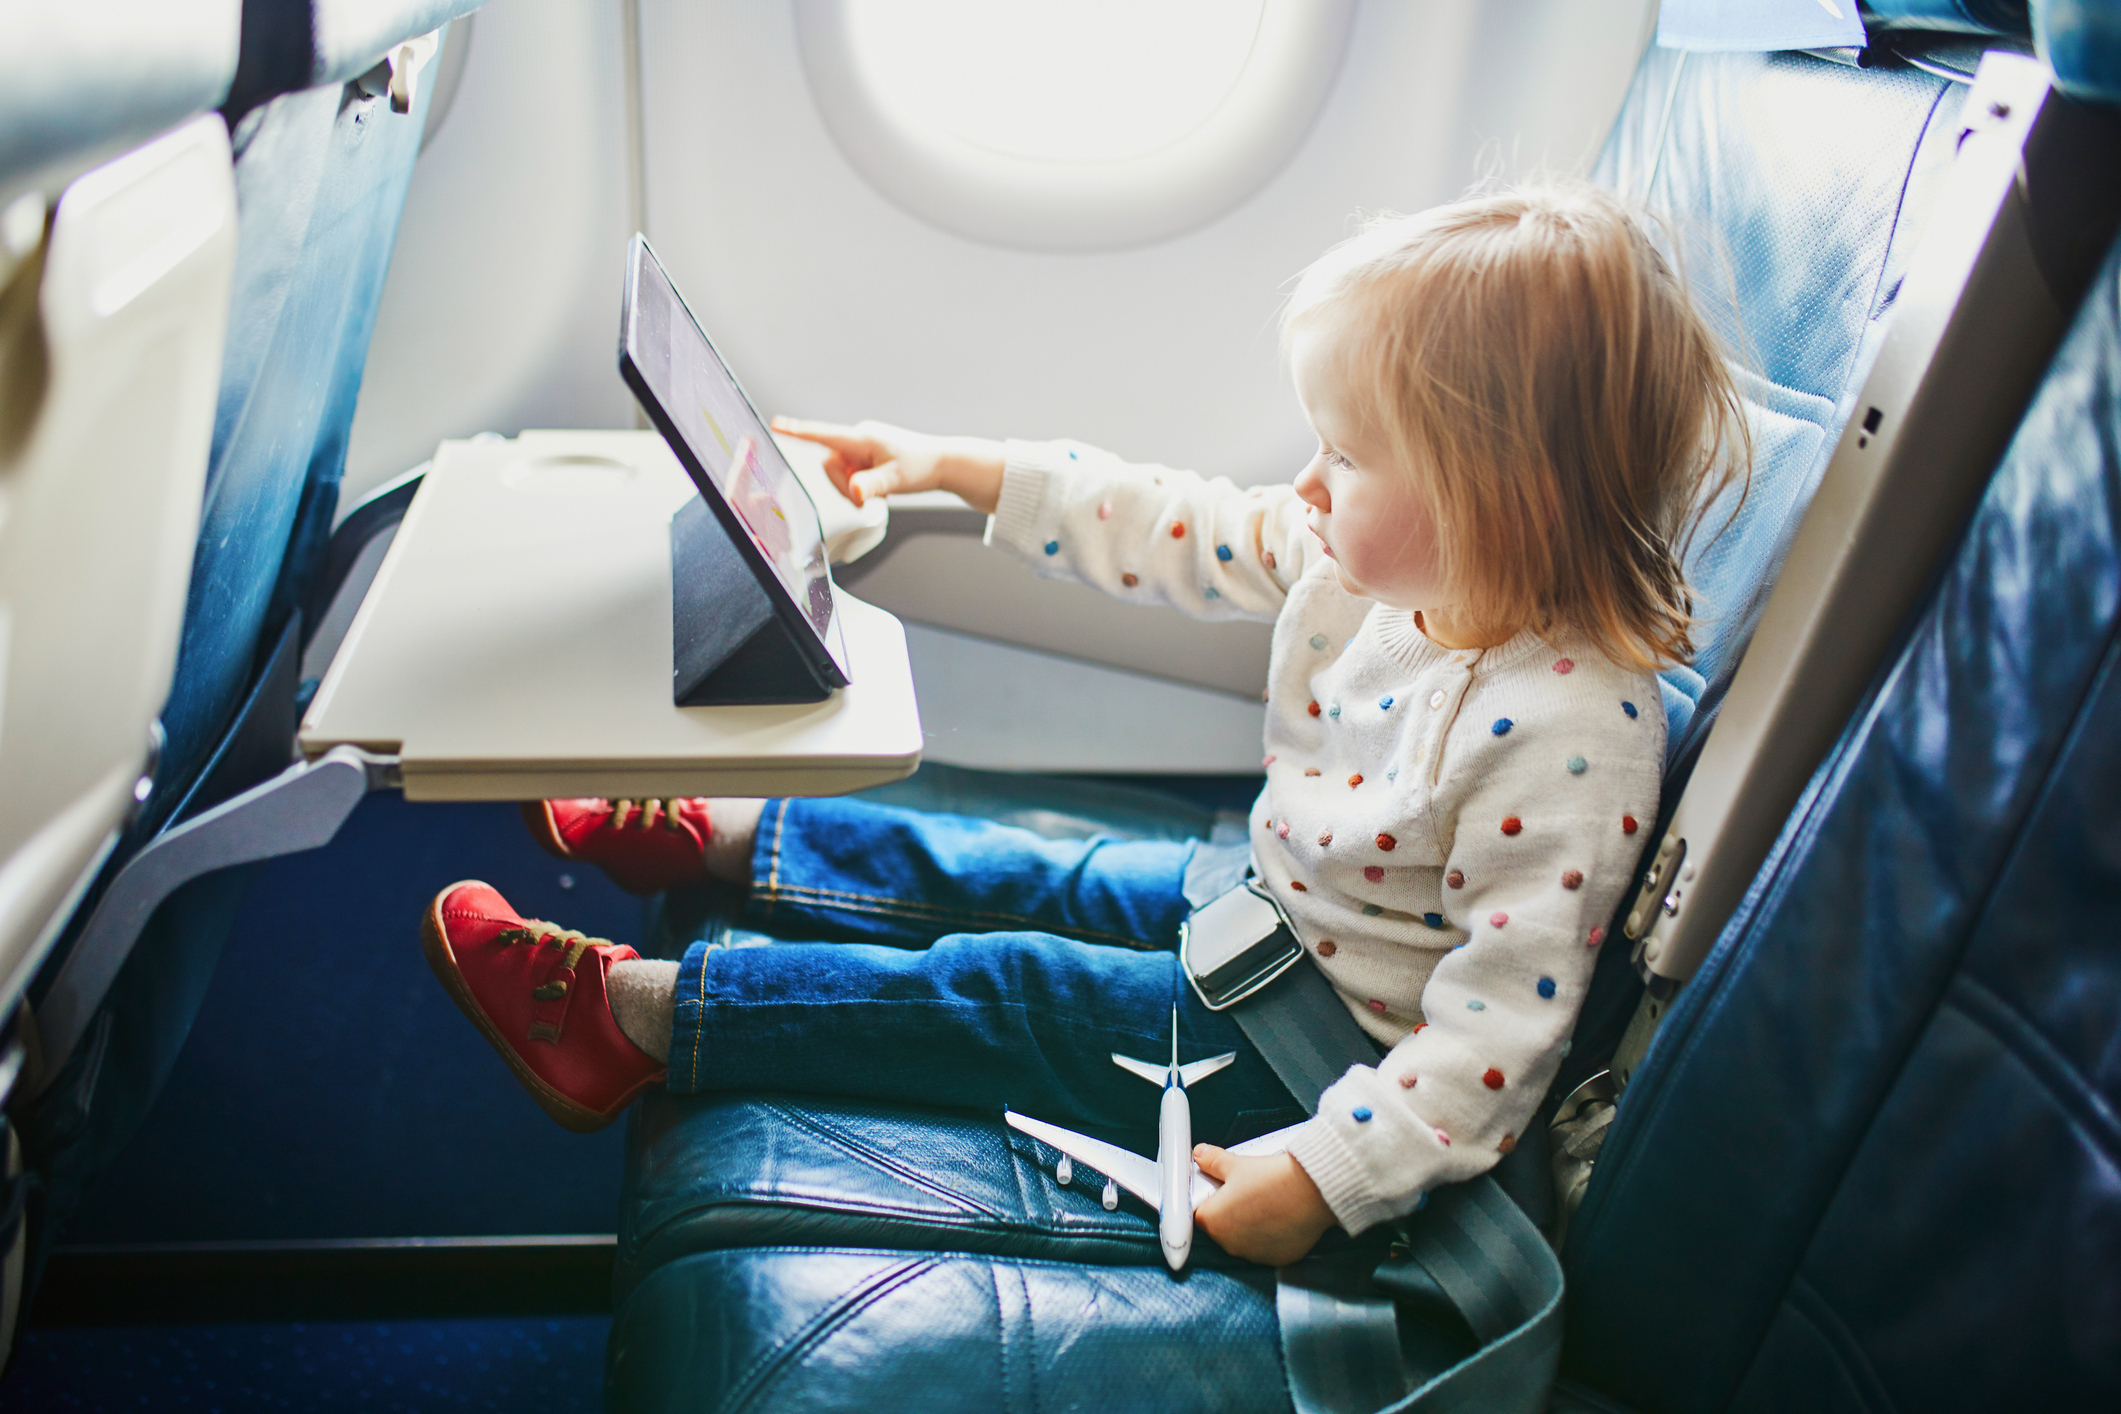 Toddler in a seat playing with a tablet and a toy airplane